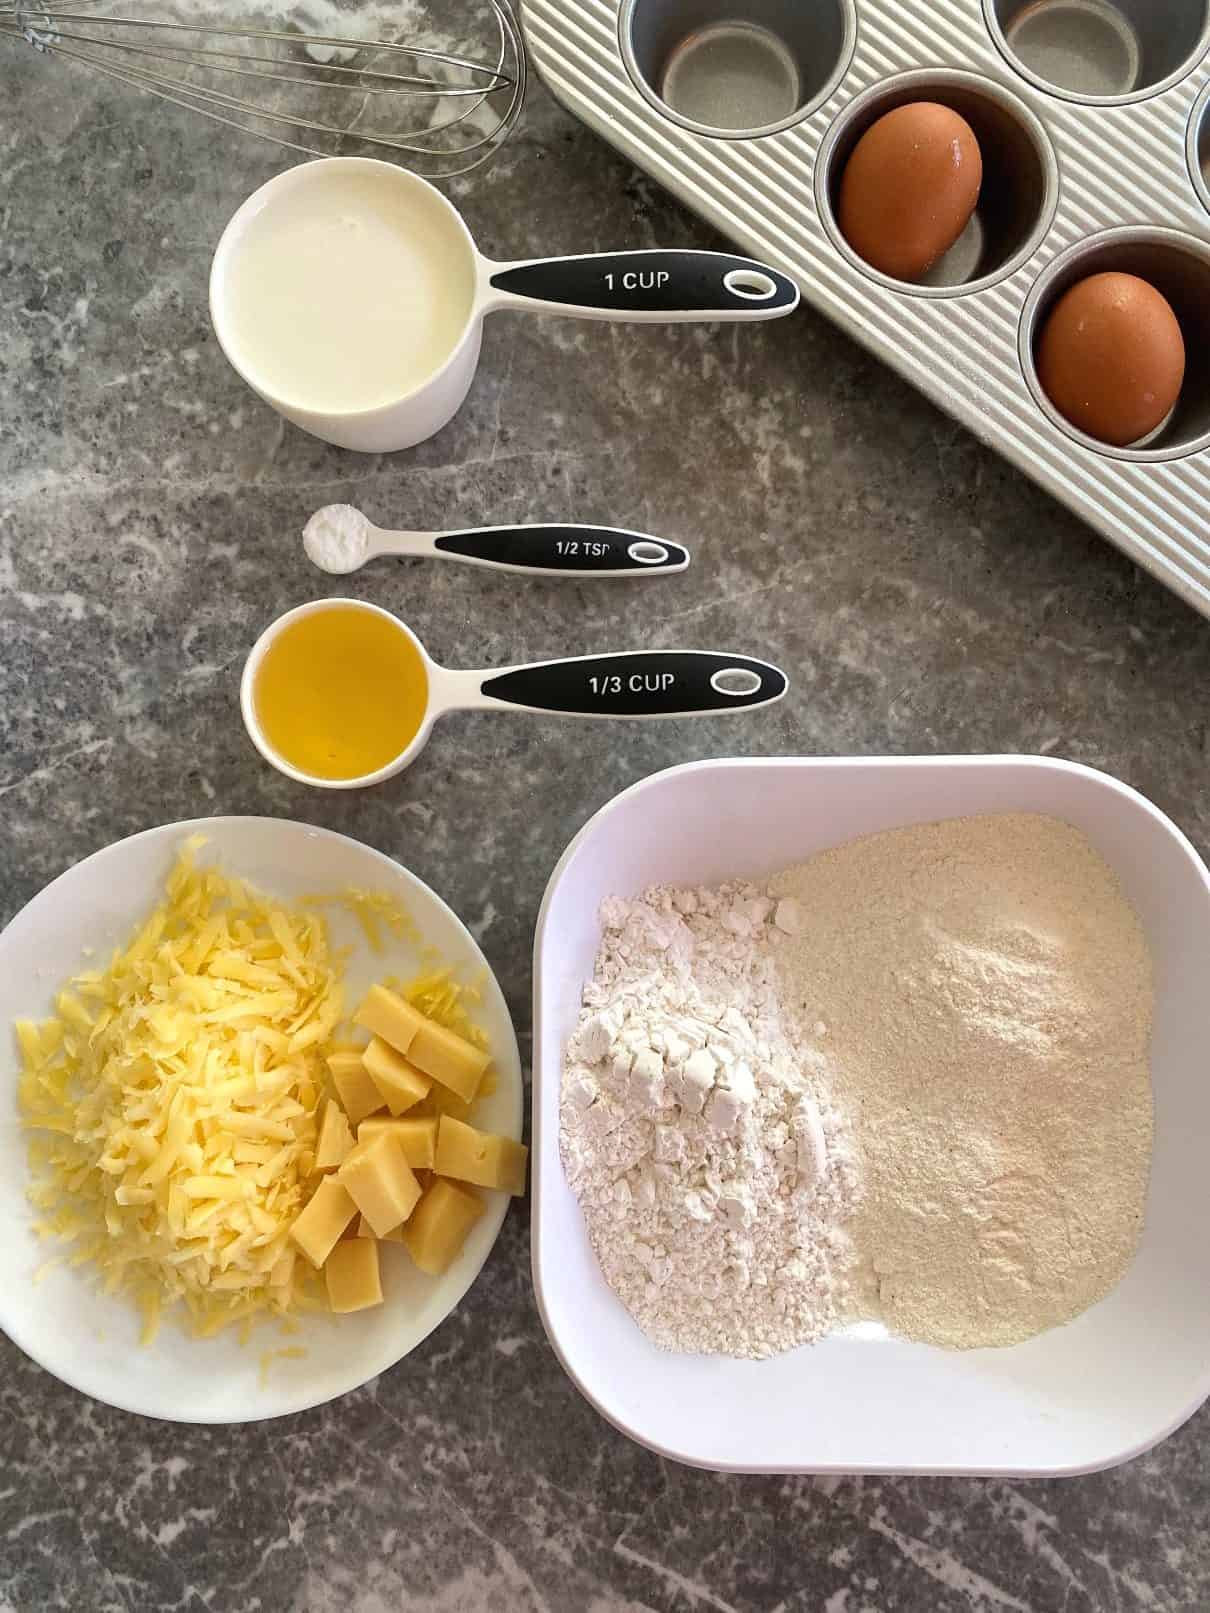 Ingredients weighed and measured for the cornbread muffins.